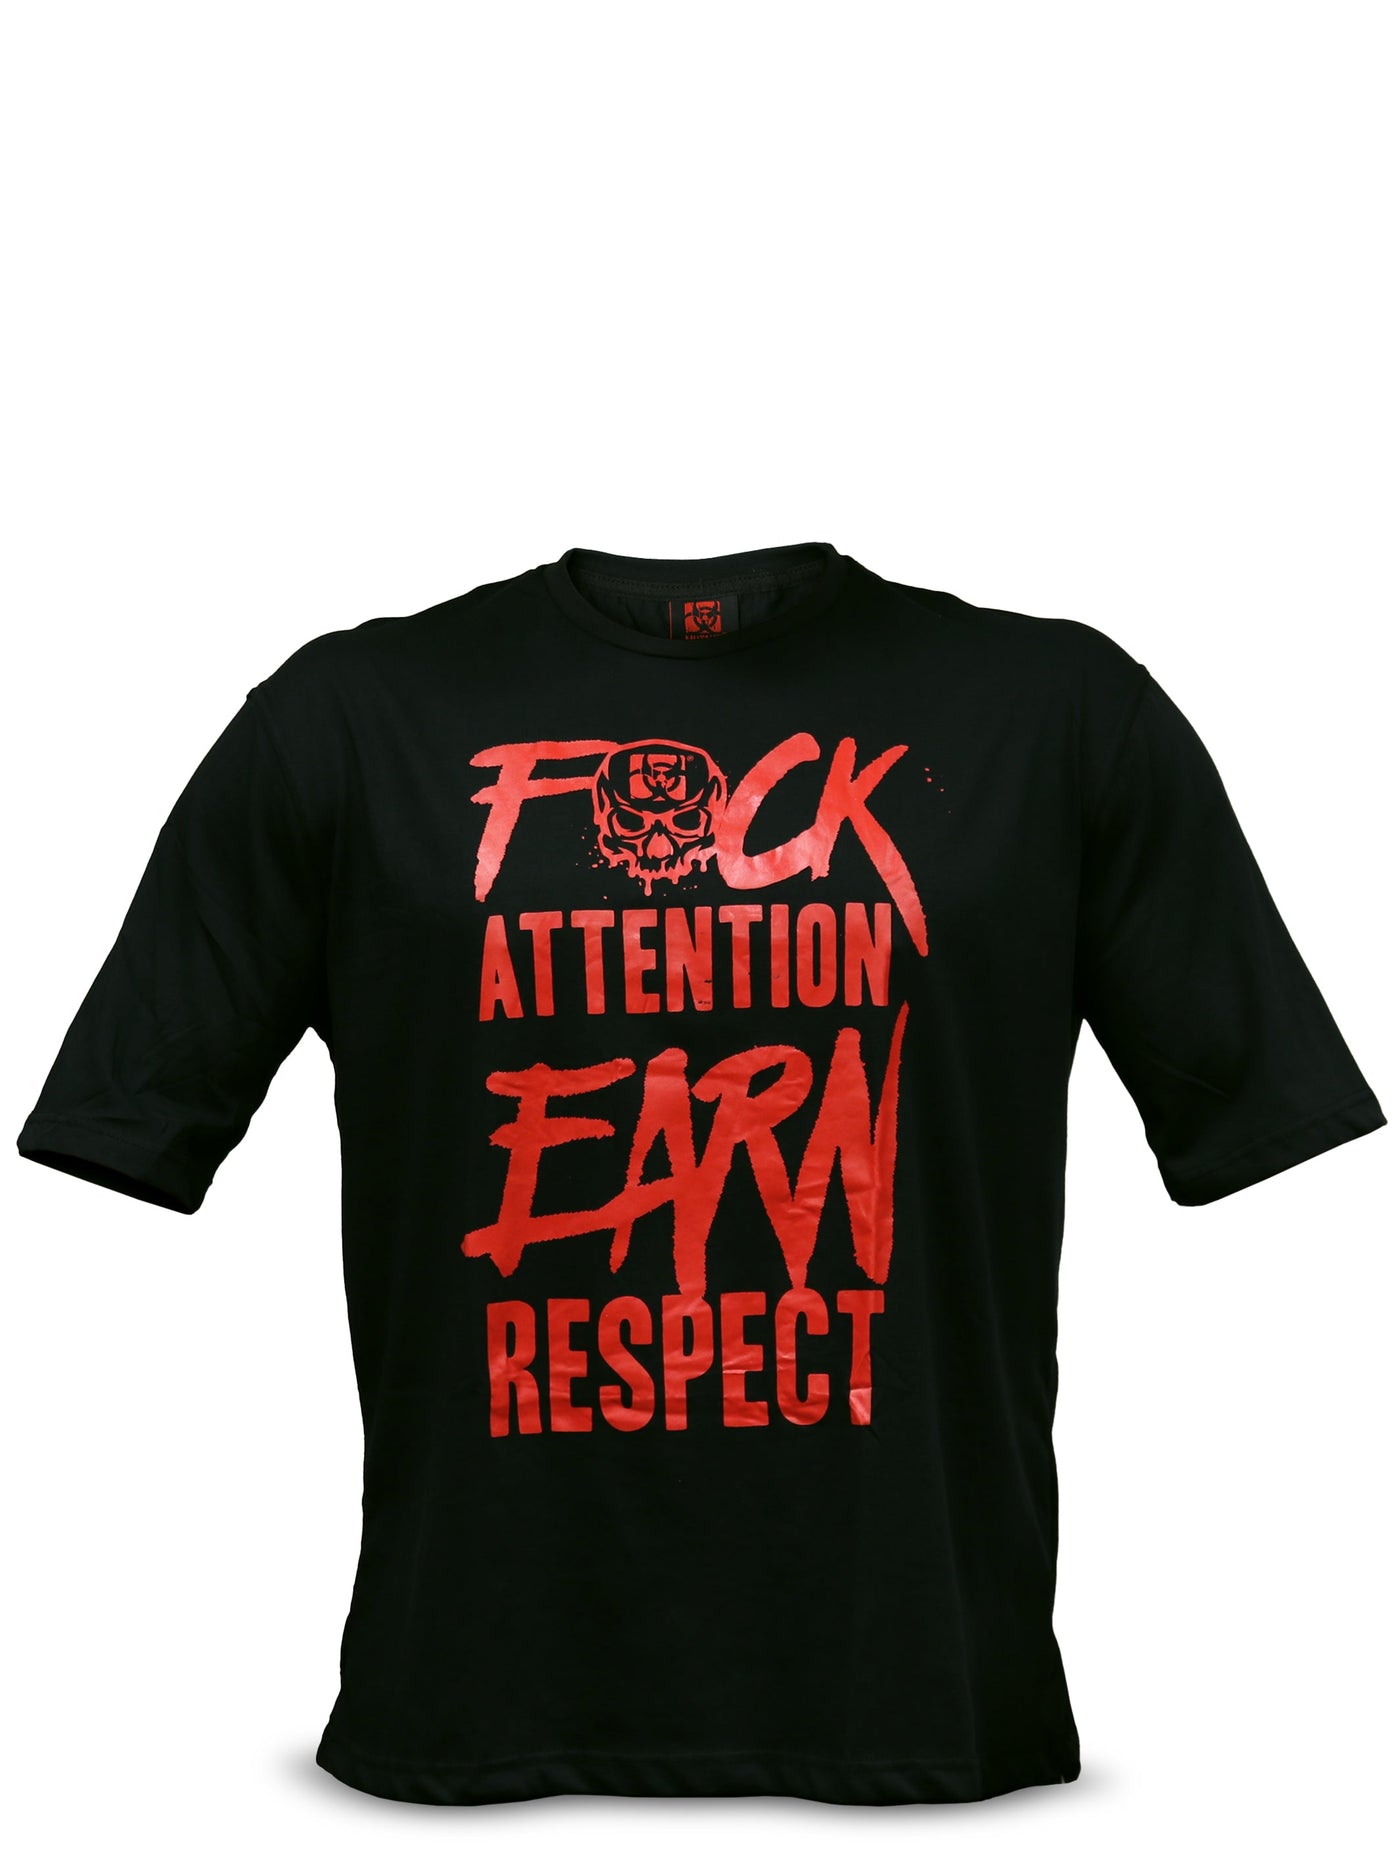 Front view of Black 'Dusty Says' Mutant Oversized Gym T-shirt featuring Dusty's motto 'F*ck attention earn respect' in red. White background.